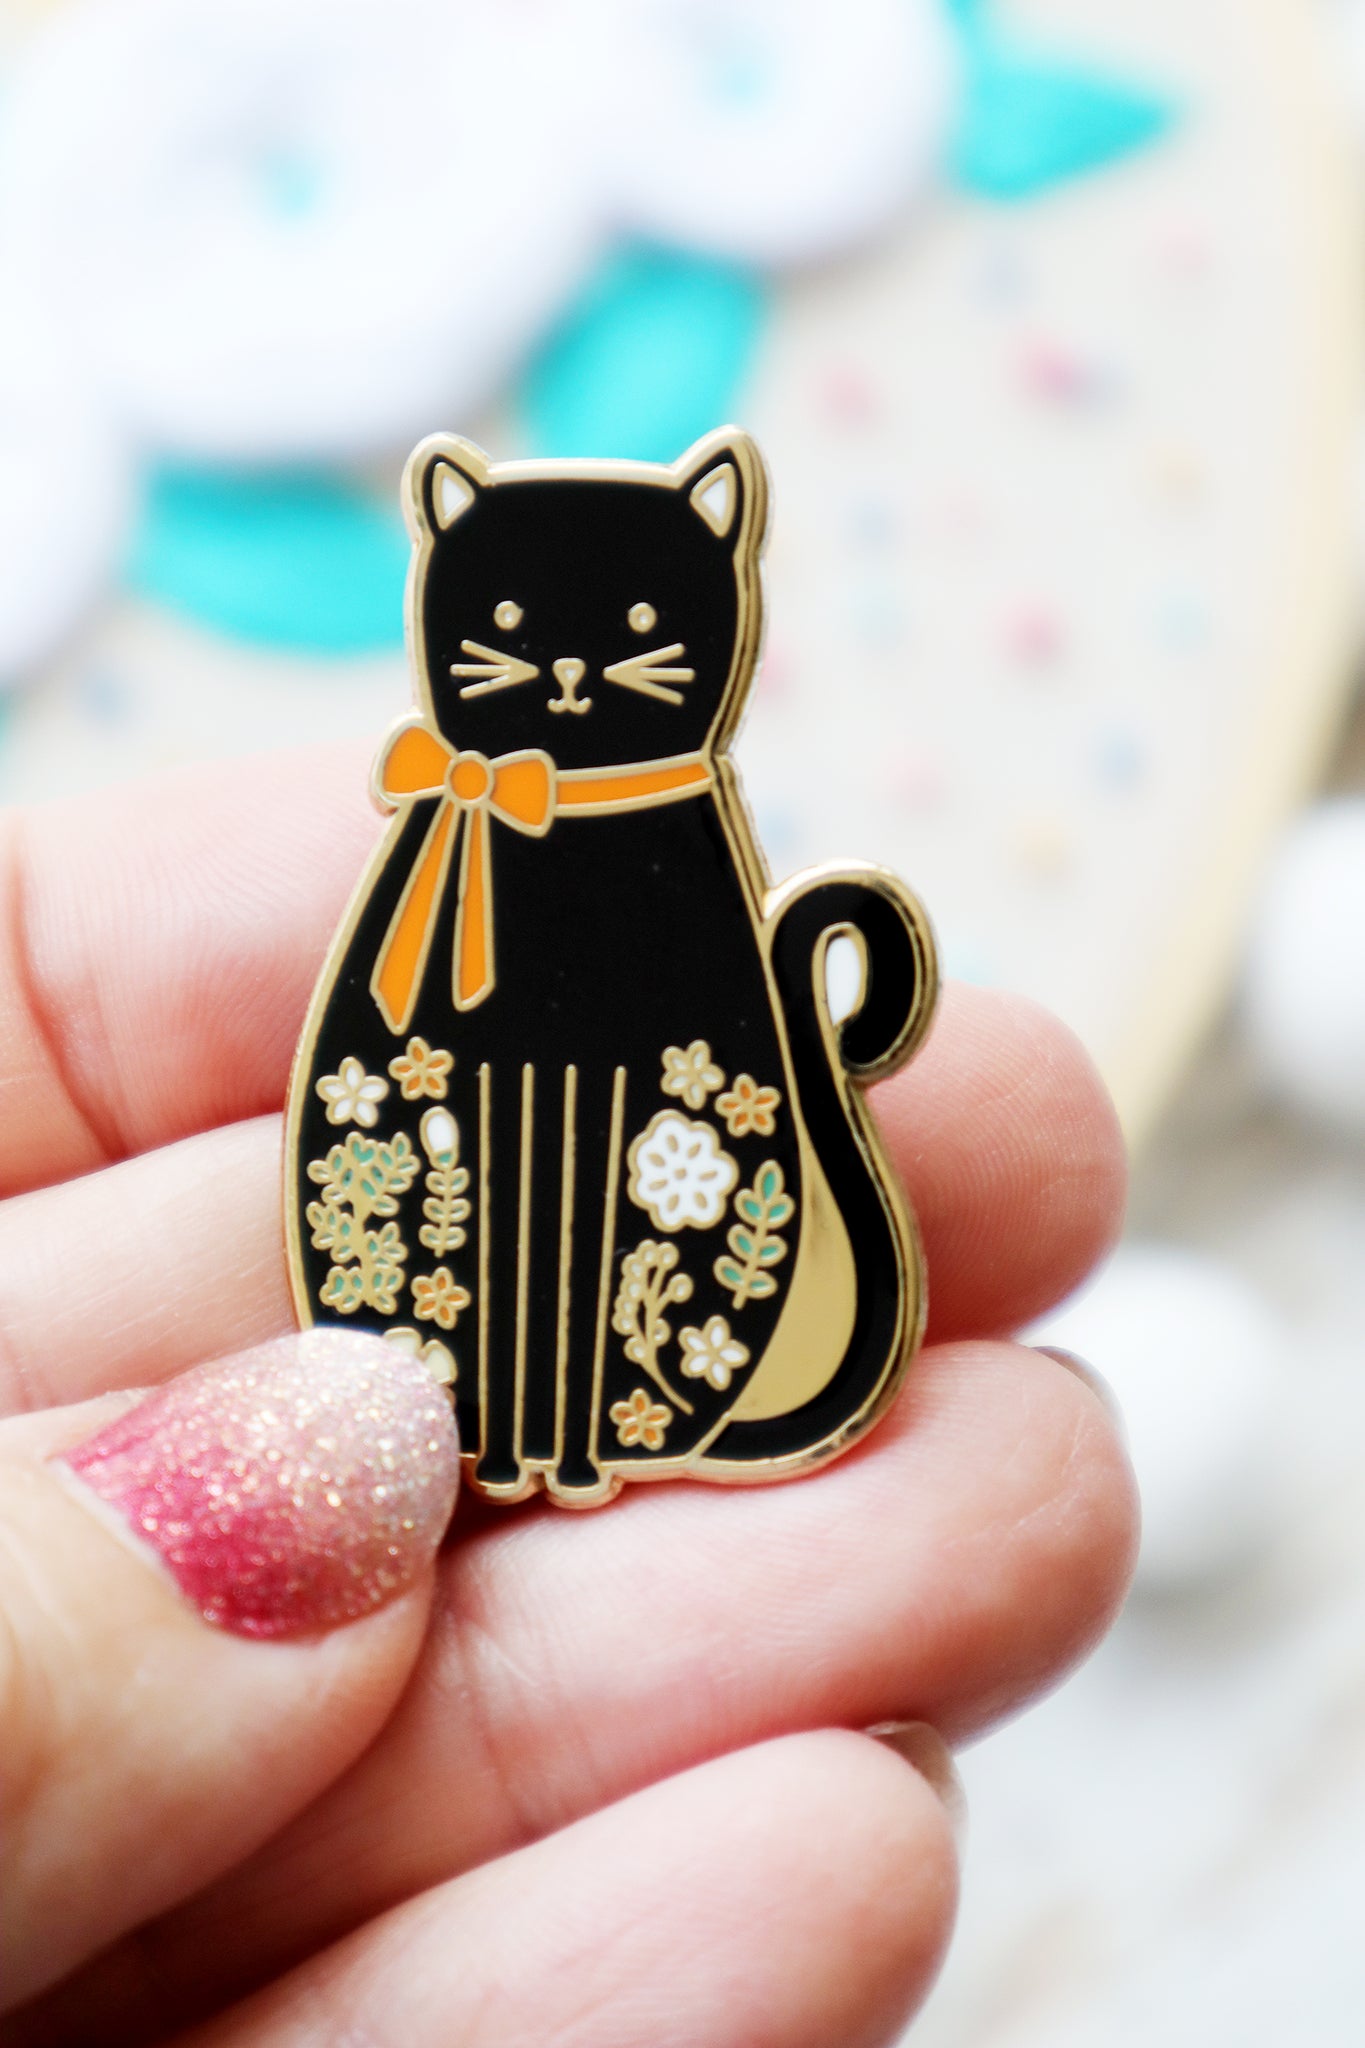 Caterpillar Cross Stitch Needle Minder - Black Cat for Cross Stitch, Sewing, Embroidery and Needlework Accessories, Enamel and Magnetic